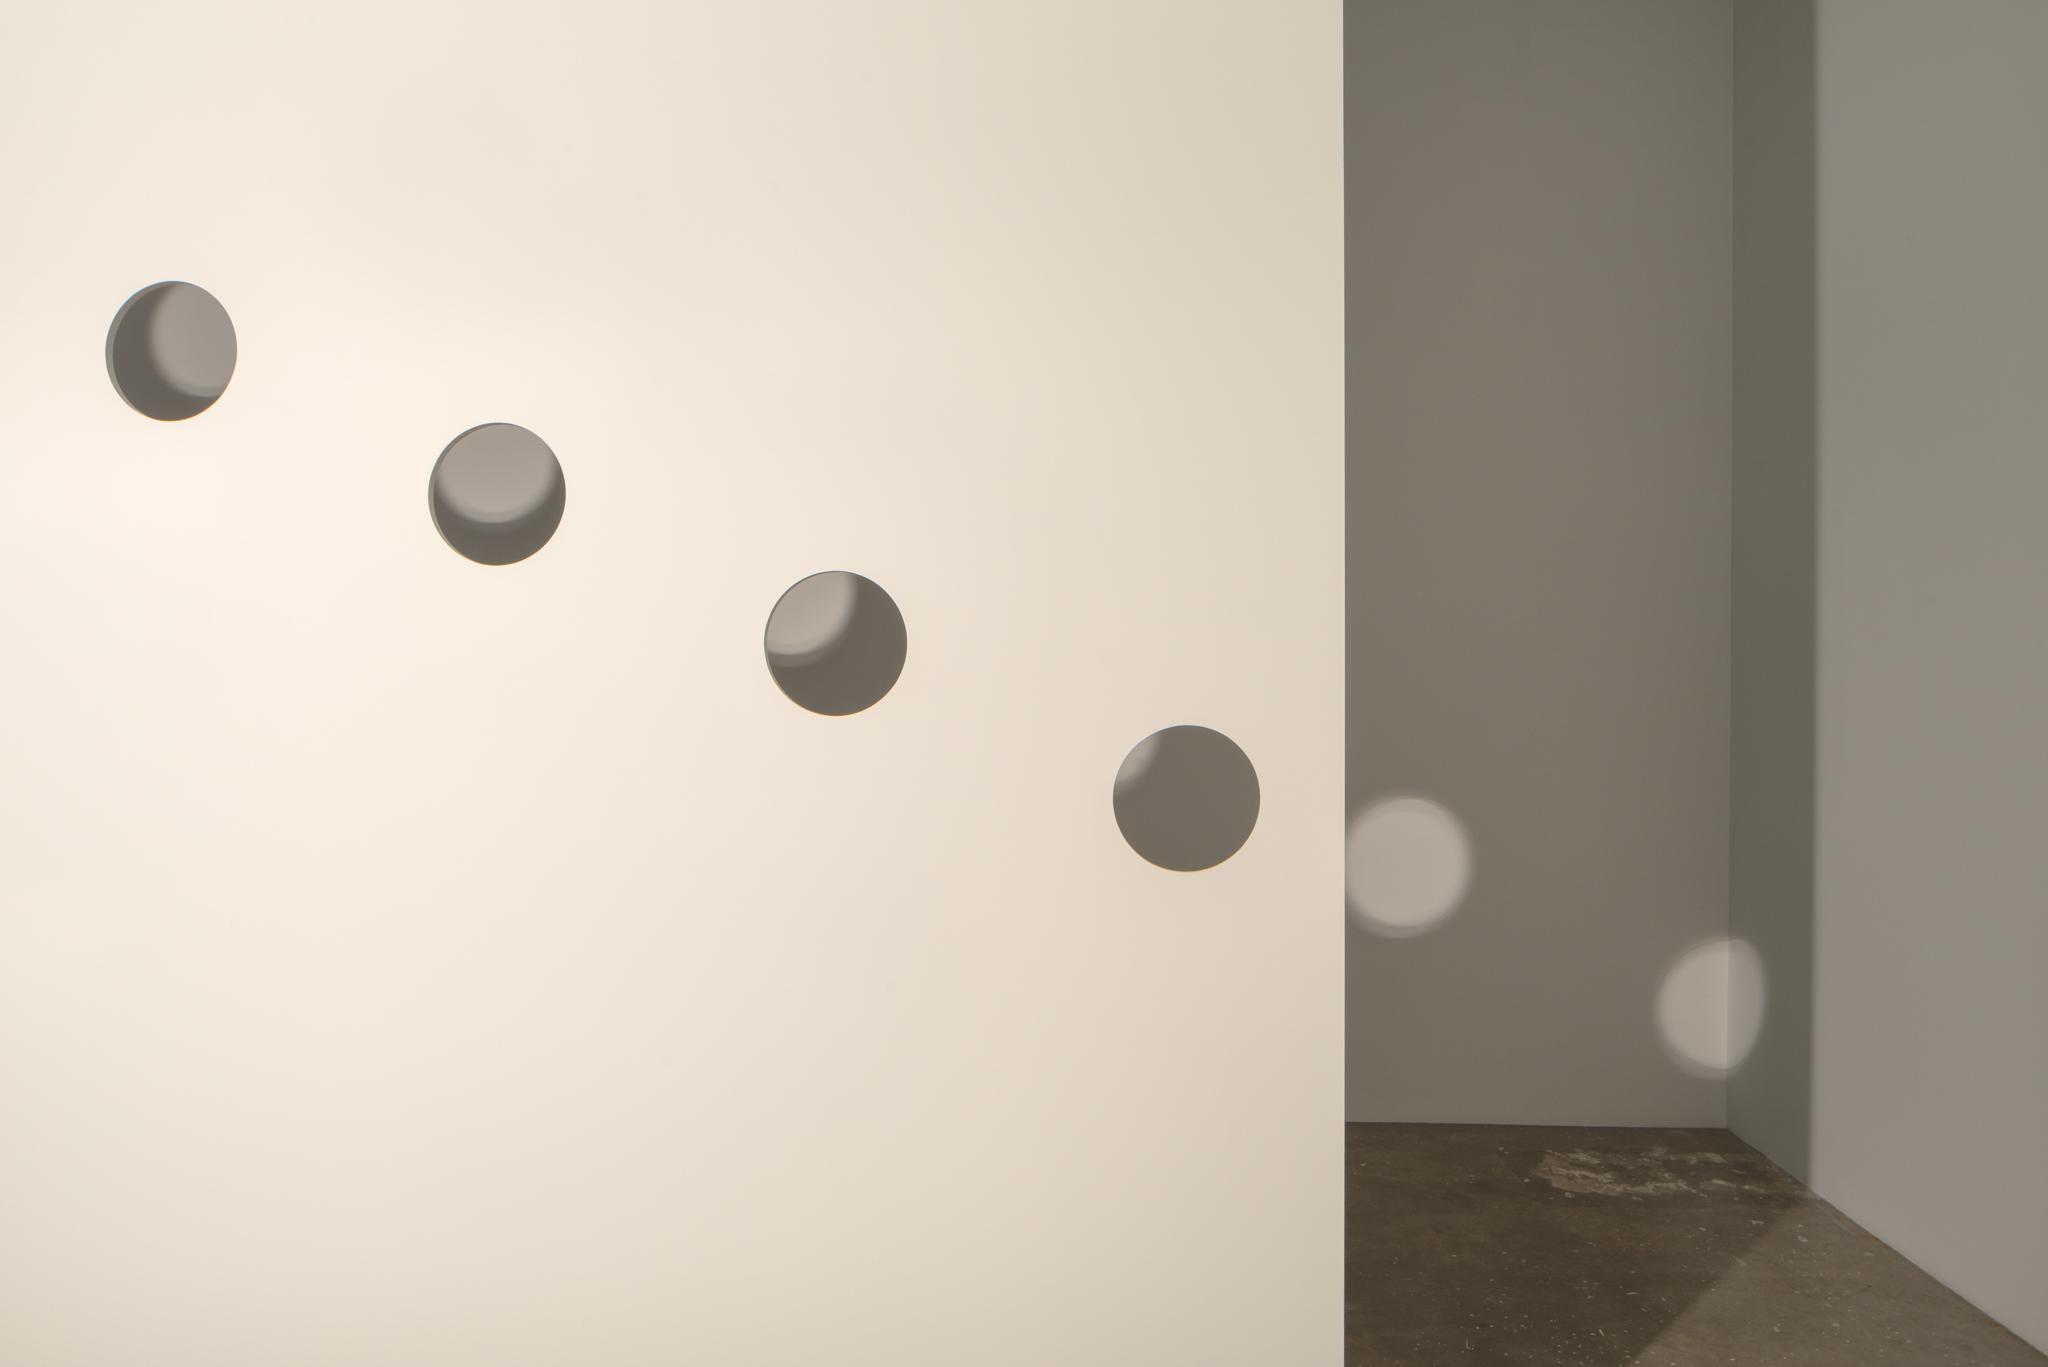 Light hitting a wall in the middle of a room, with holes cut in the wall to allow circles of light to be cast on the back wall.